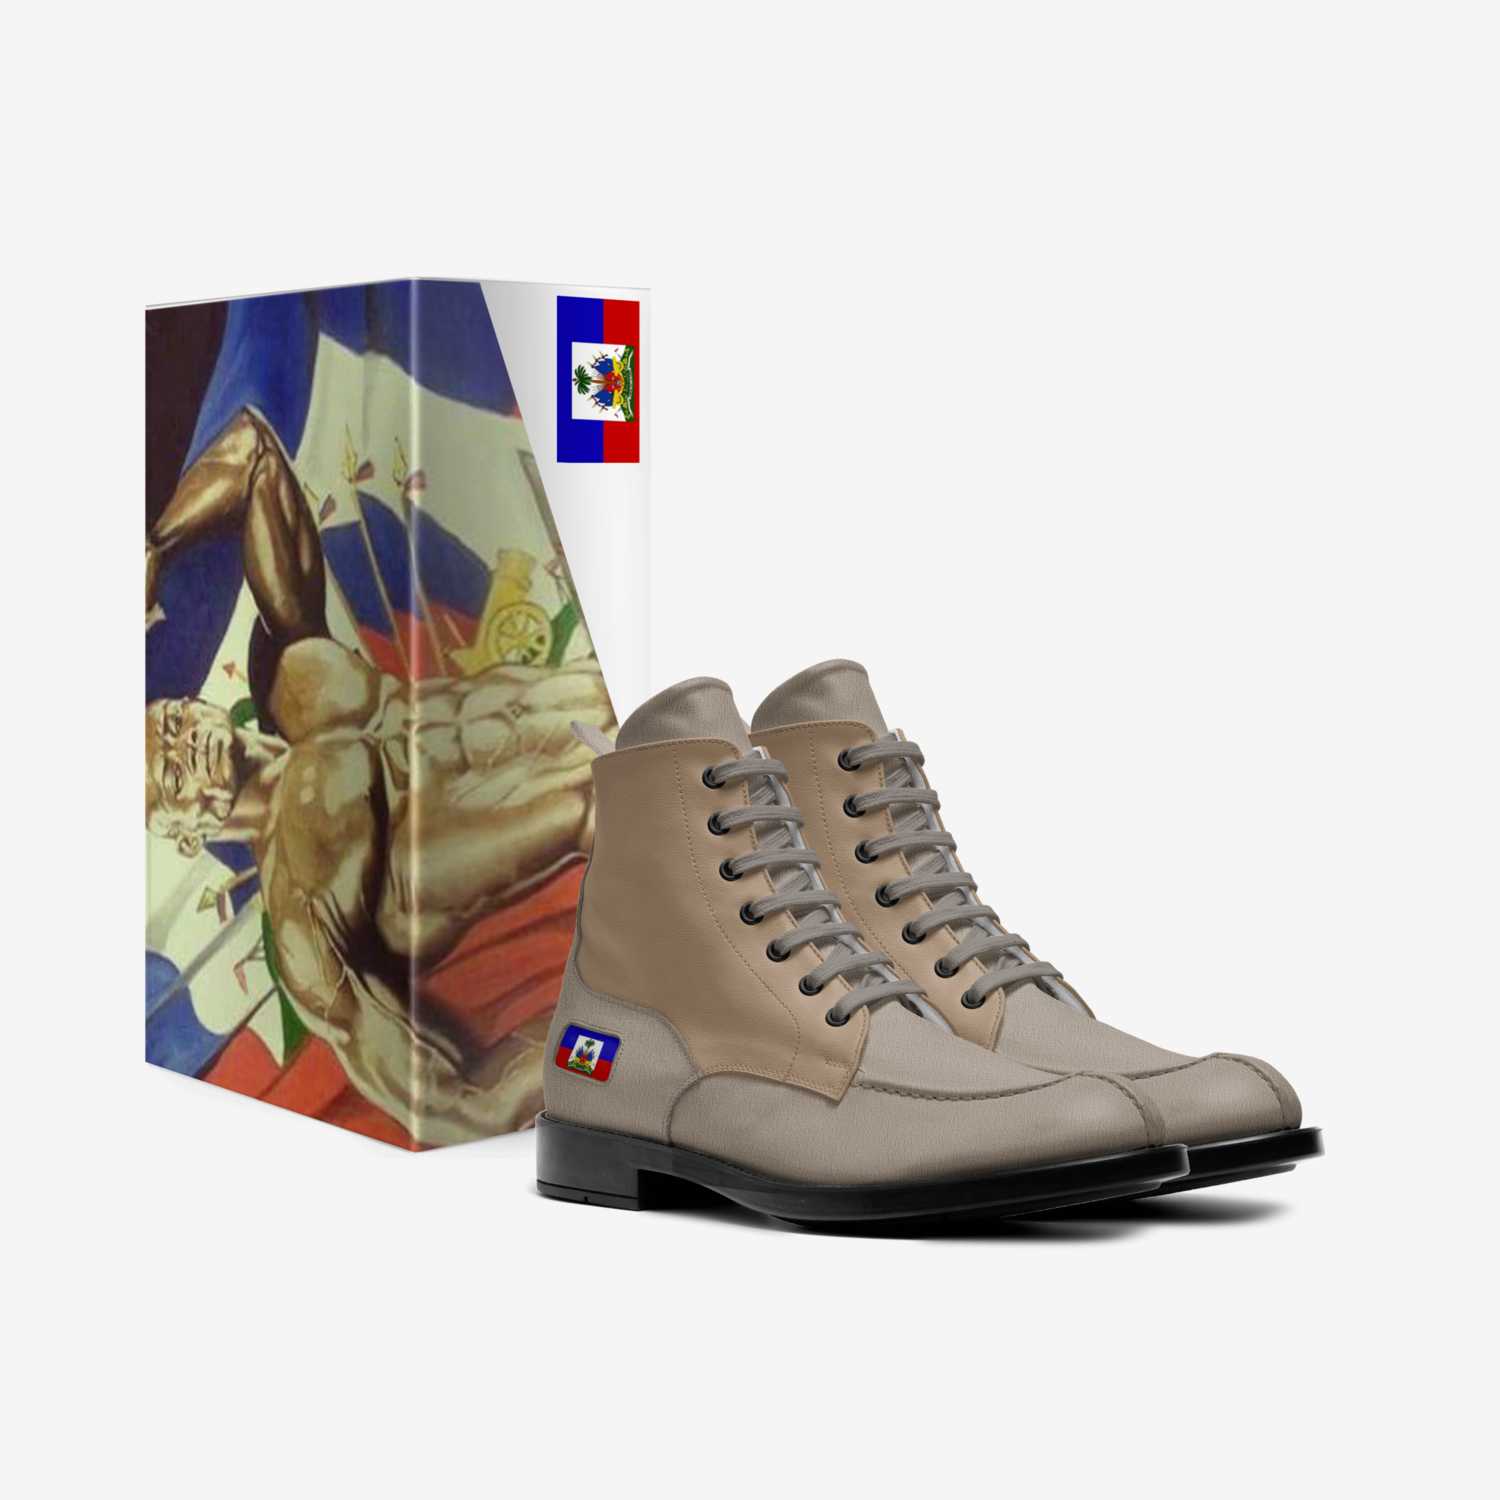 Zion Fashions  custom made in Italy shoes by Chelg Corporation | Box view